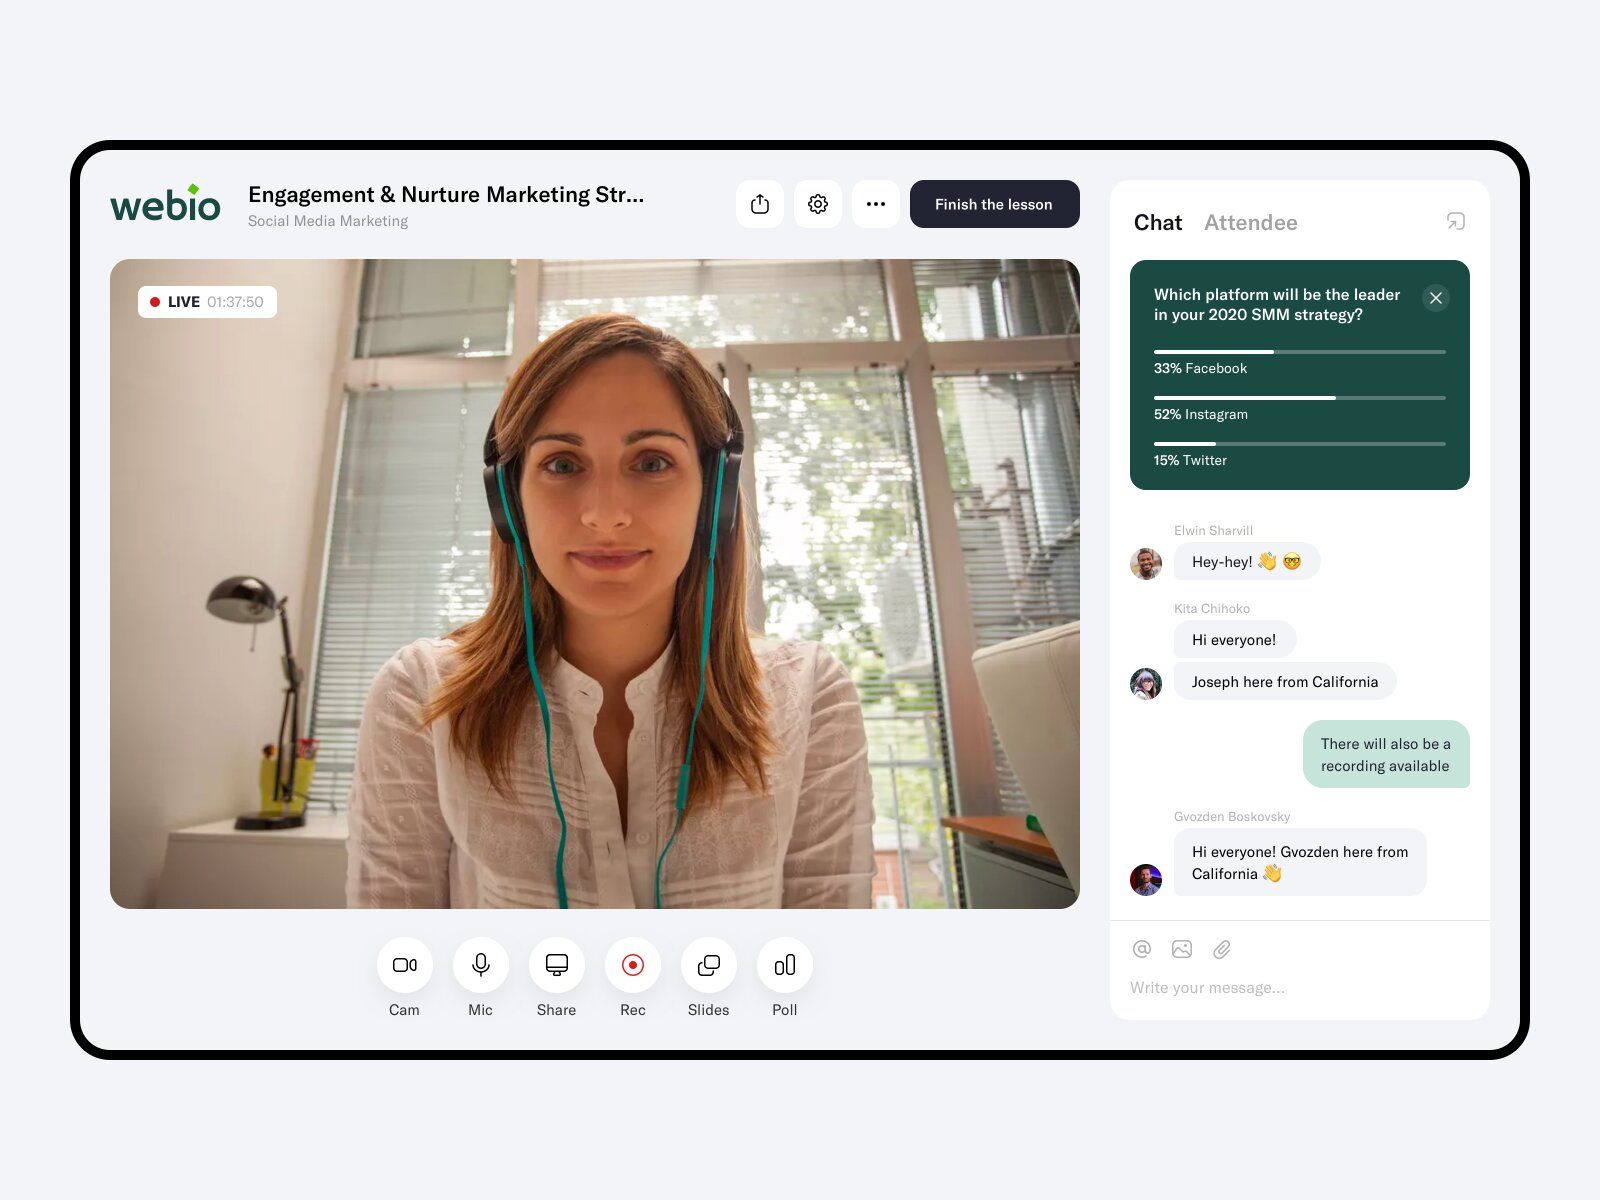 You may enhance video calls on your eLearning website or app with features like screen sharing or built-in polls to give users additional value